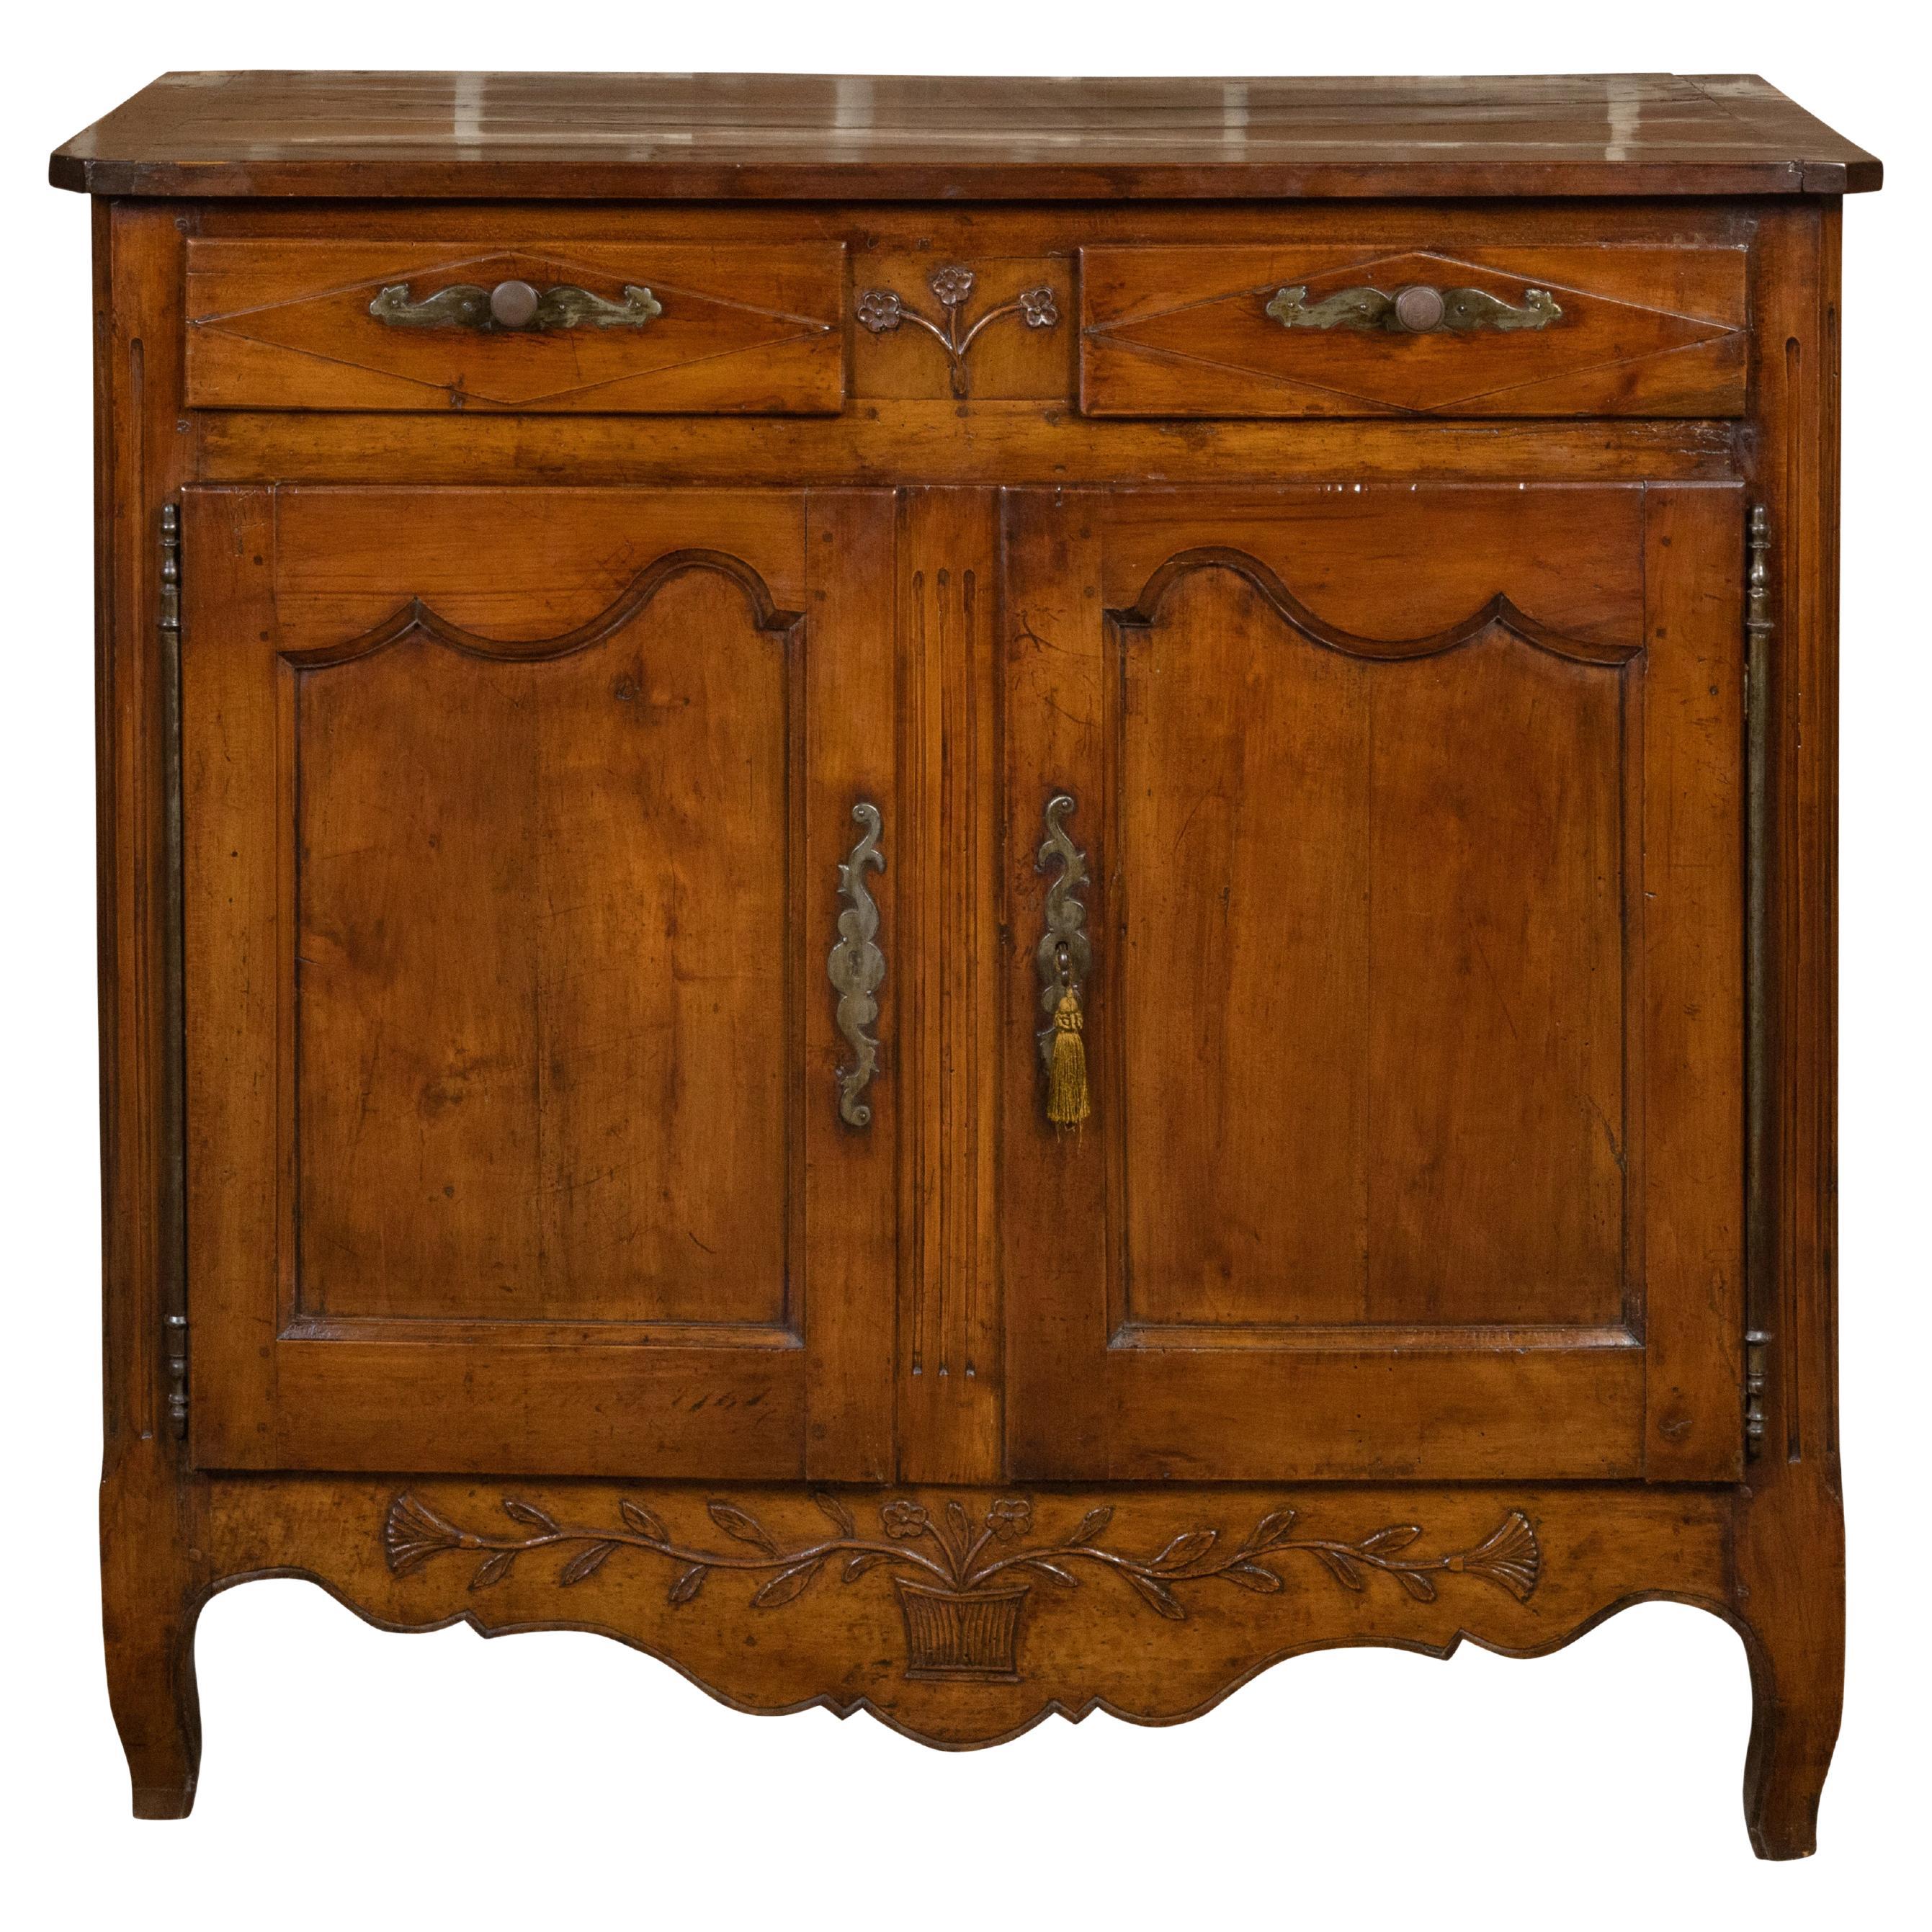 French 18th Century Walnut Buffet with Carved Floral Motifs, Drawers and Doors